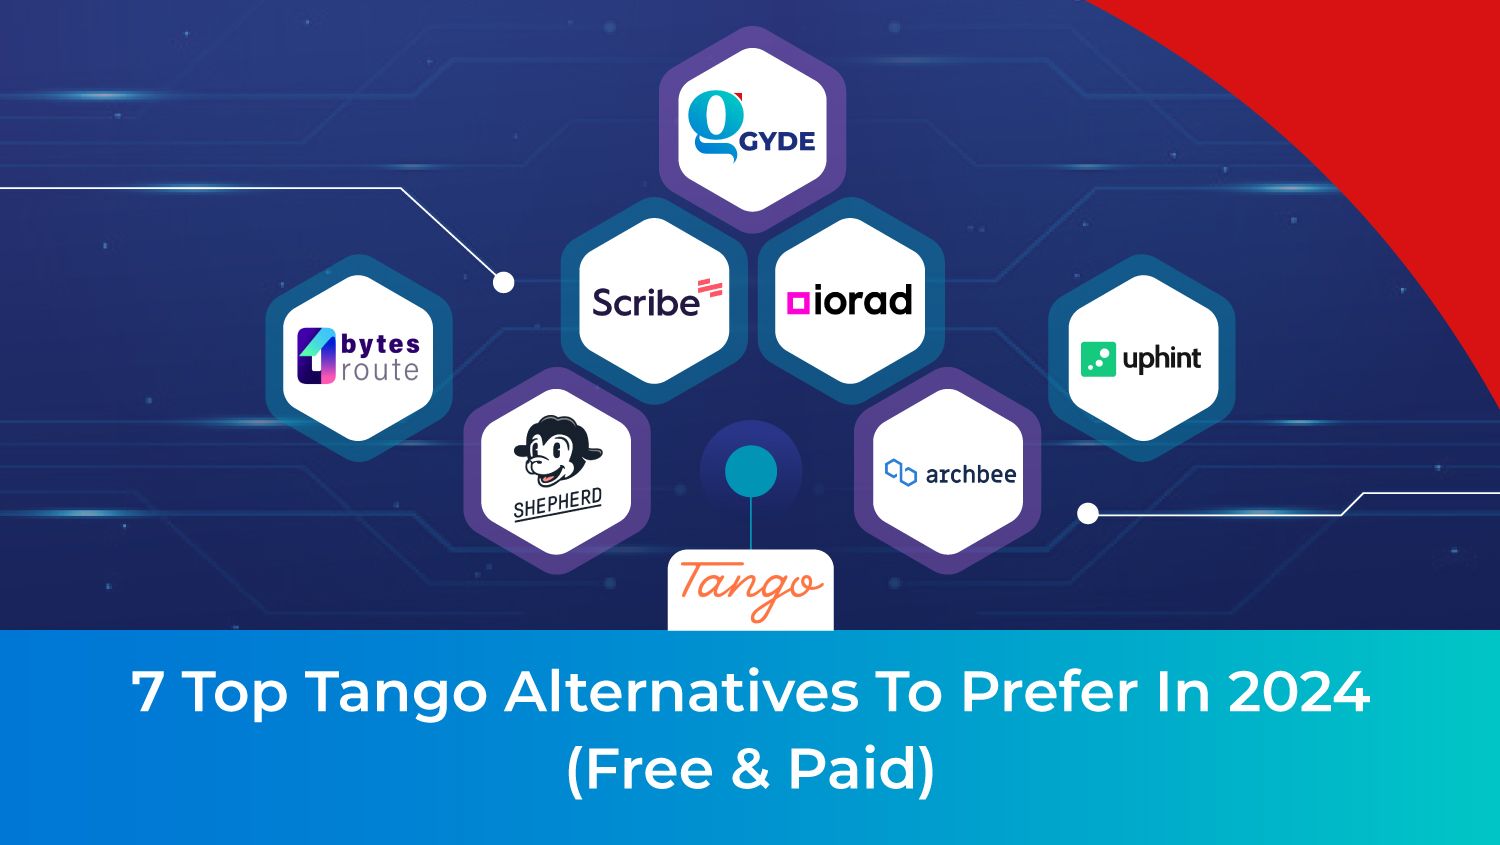 7 Top Tango Alternatives to Prefer in 2024 (Free & Paid)